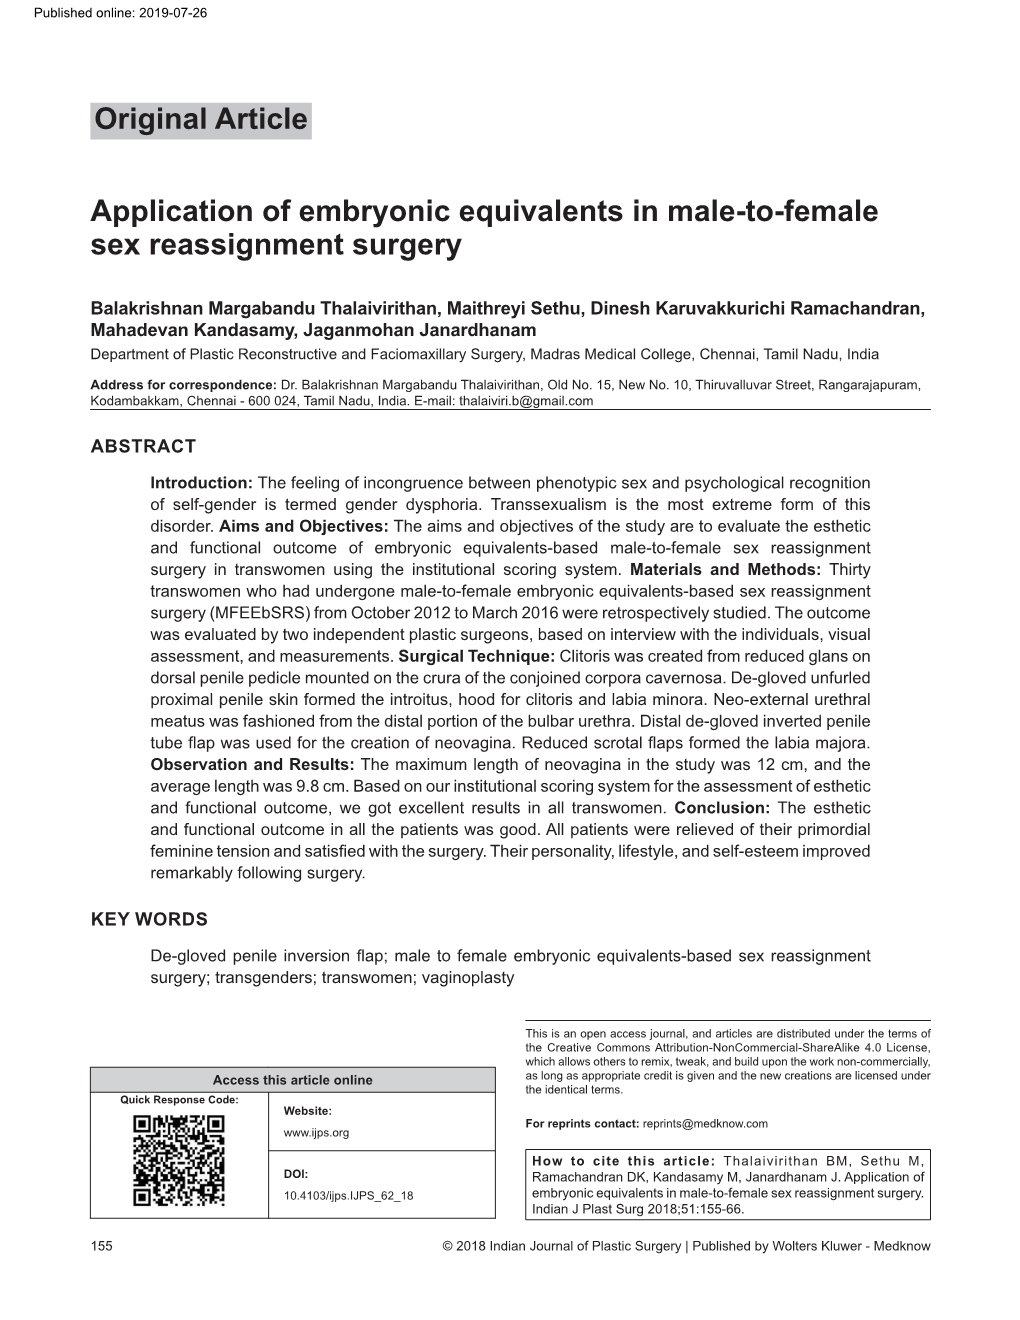 Application of Embryonic Equivalents in Male‑To‑Female Sex Reassignment Surgery Original Article